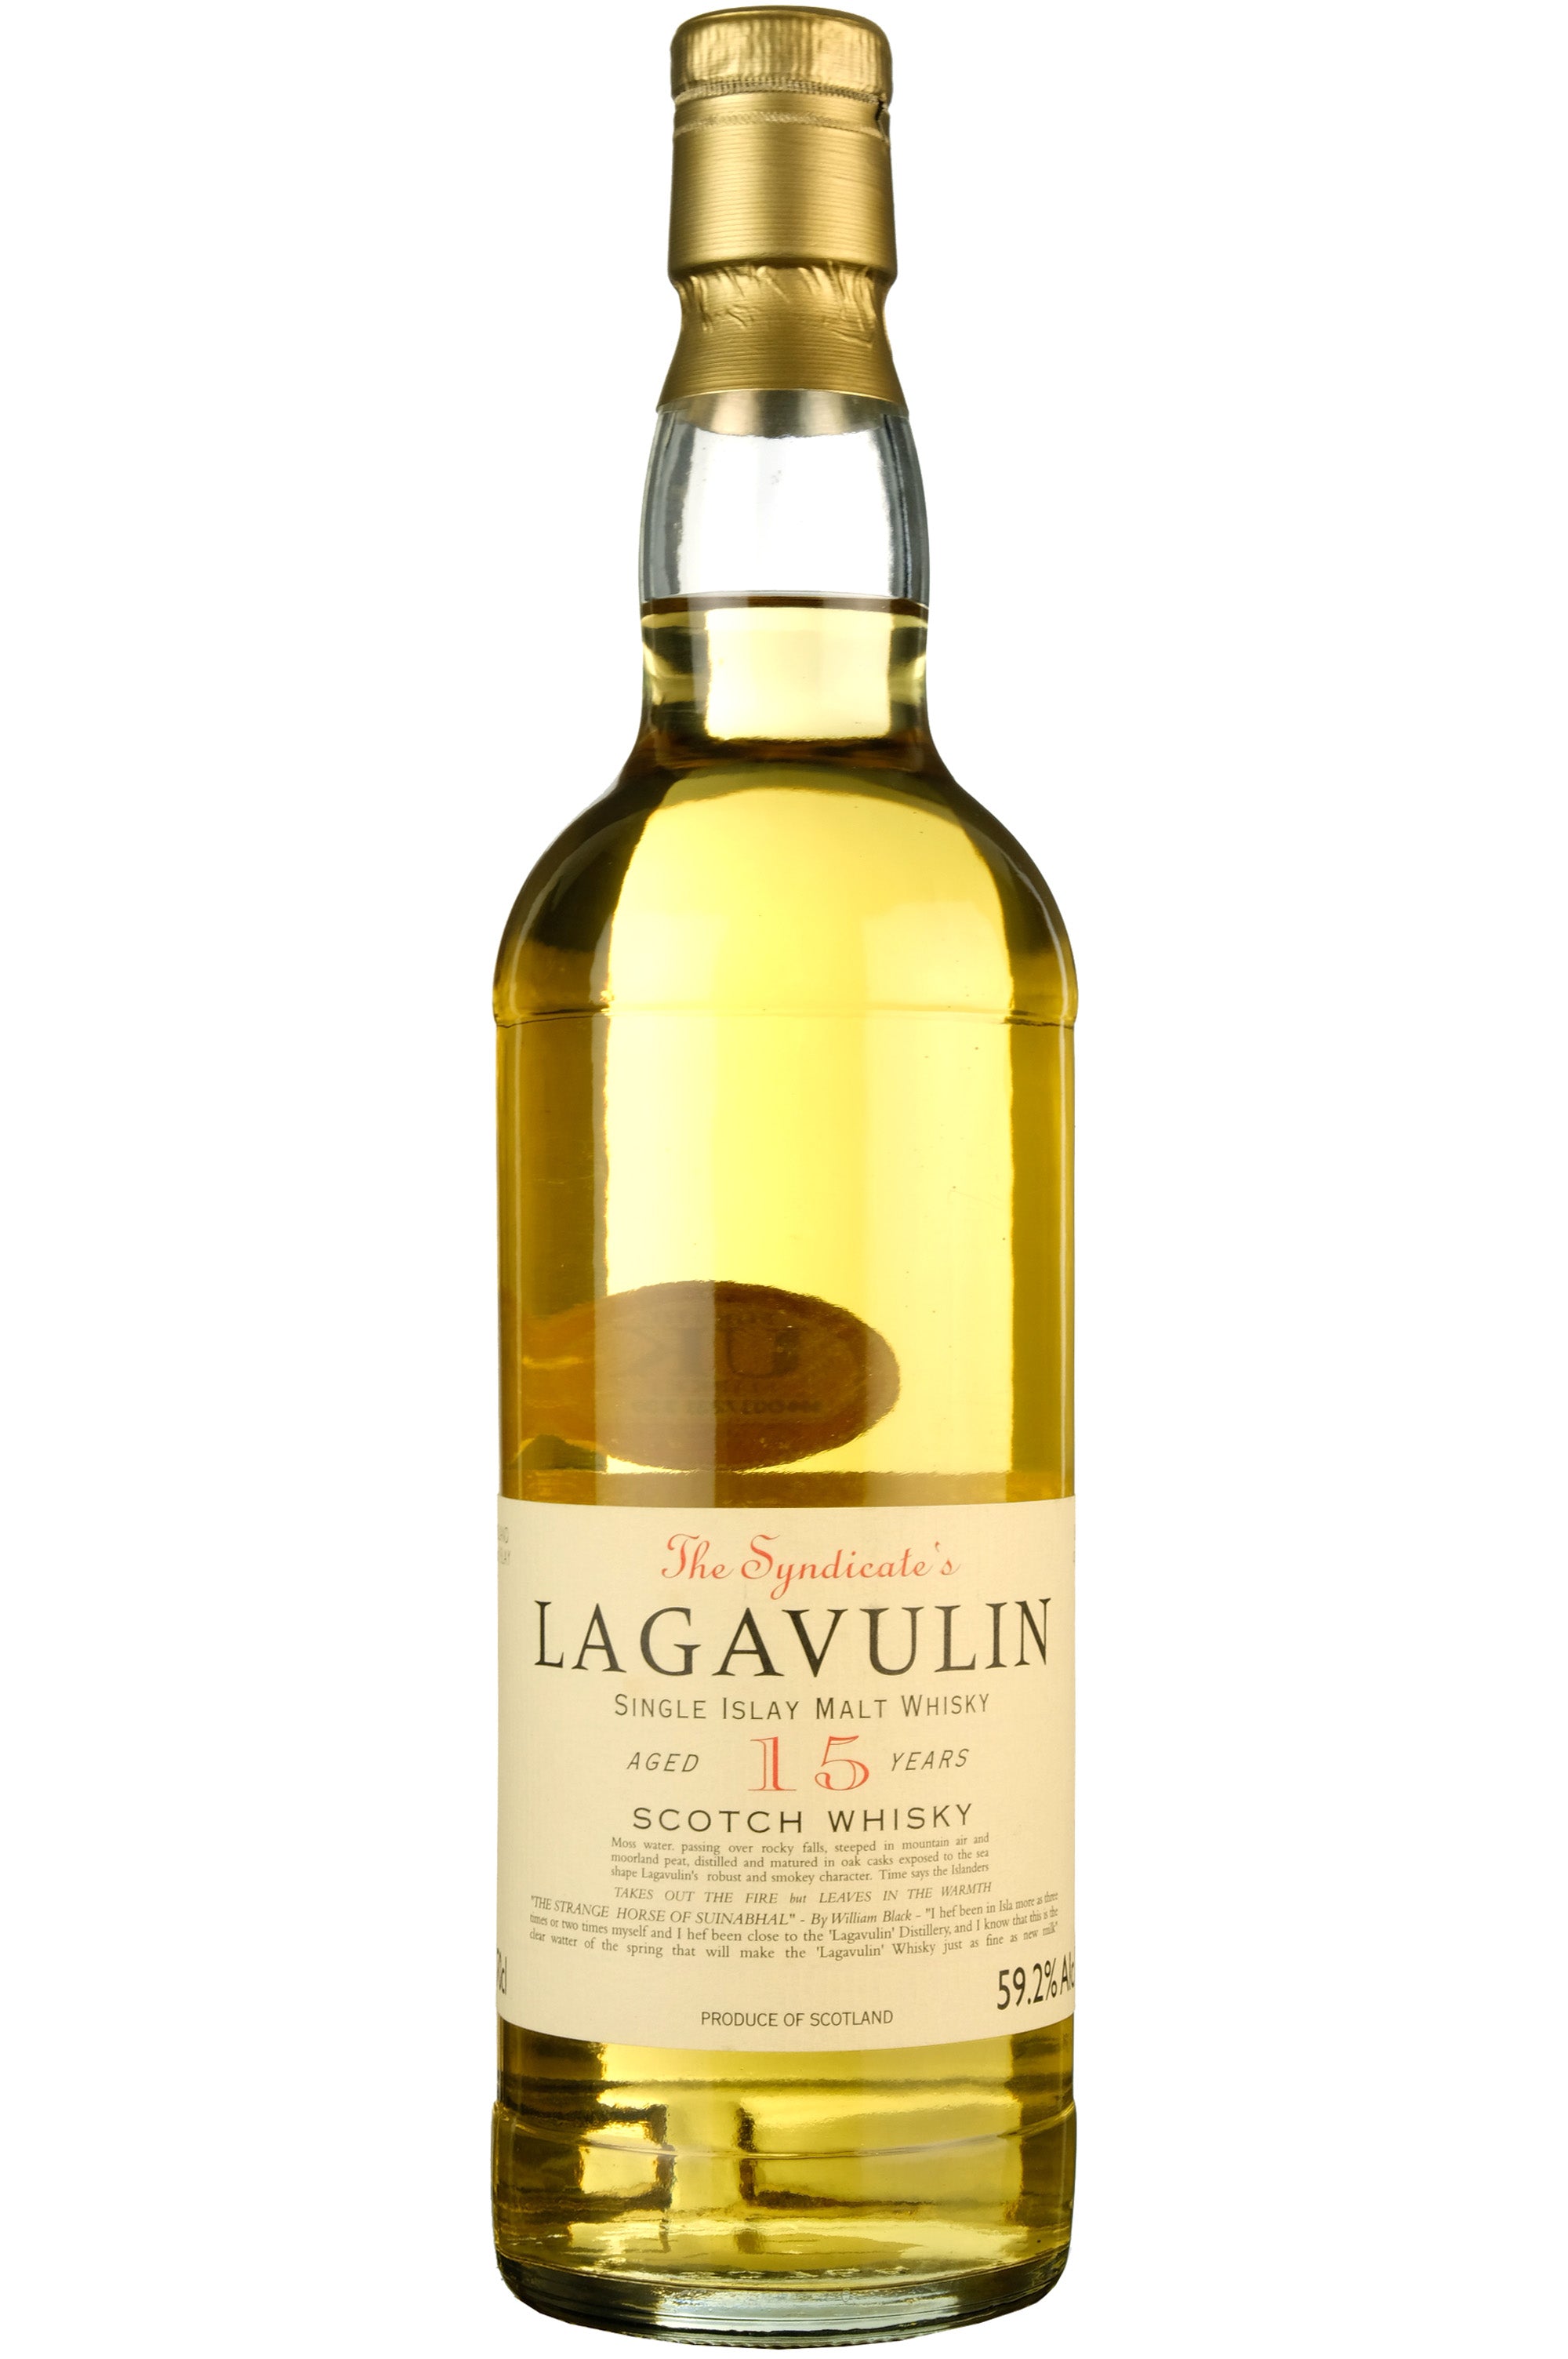 Lagavulin 1979 | 15 Year Old The Syndicate's